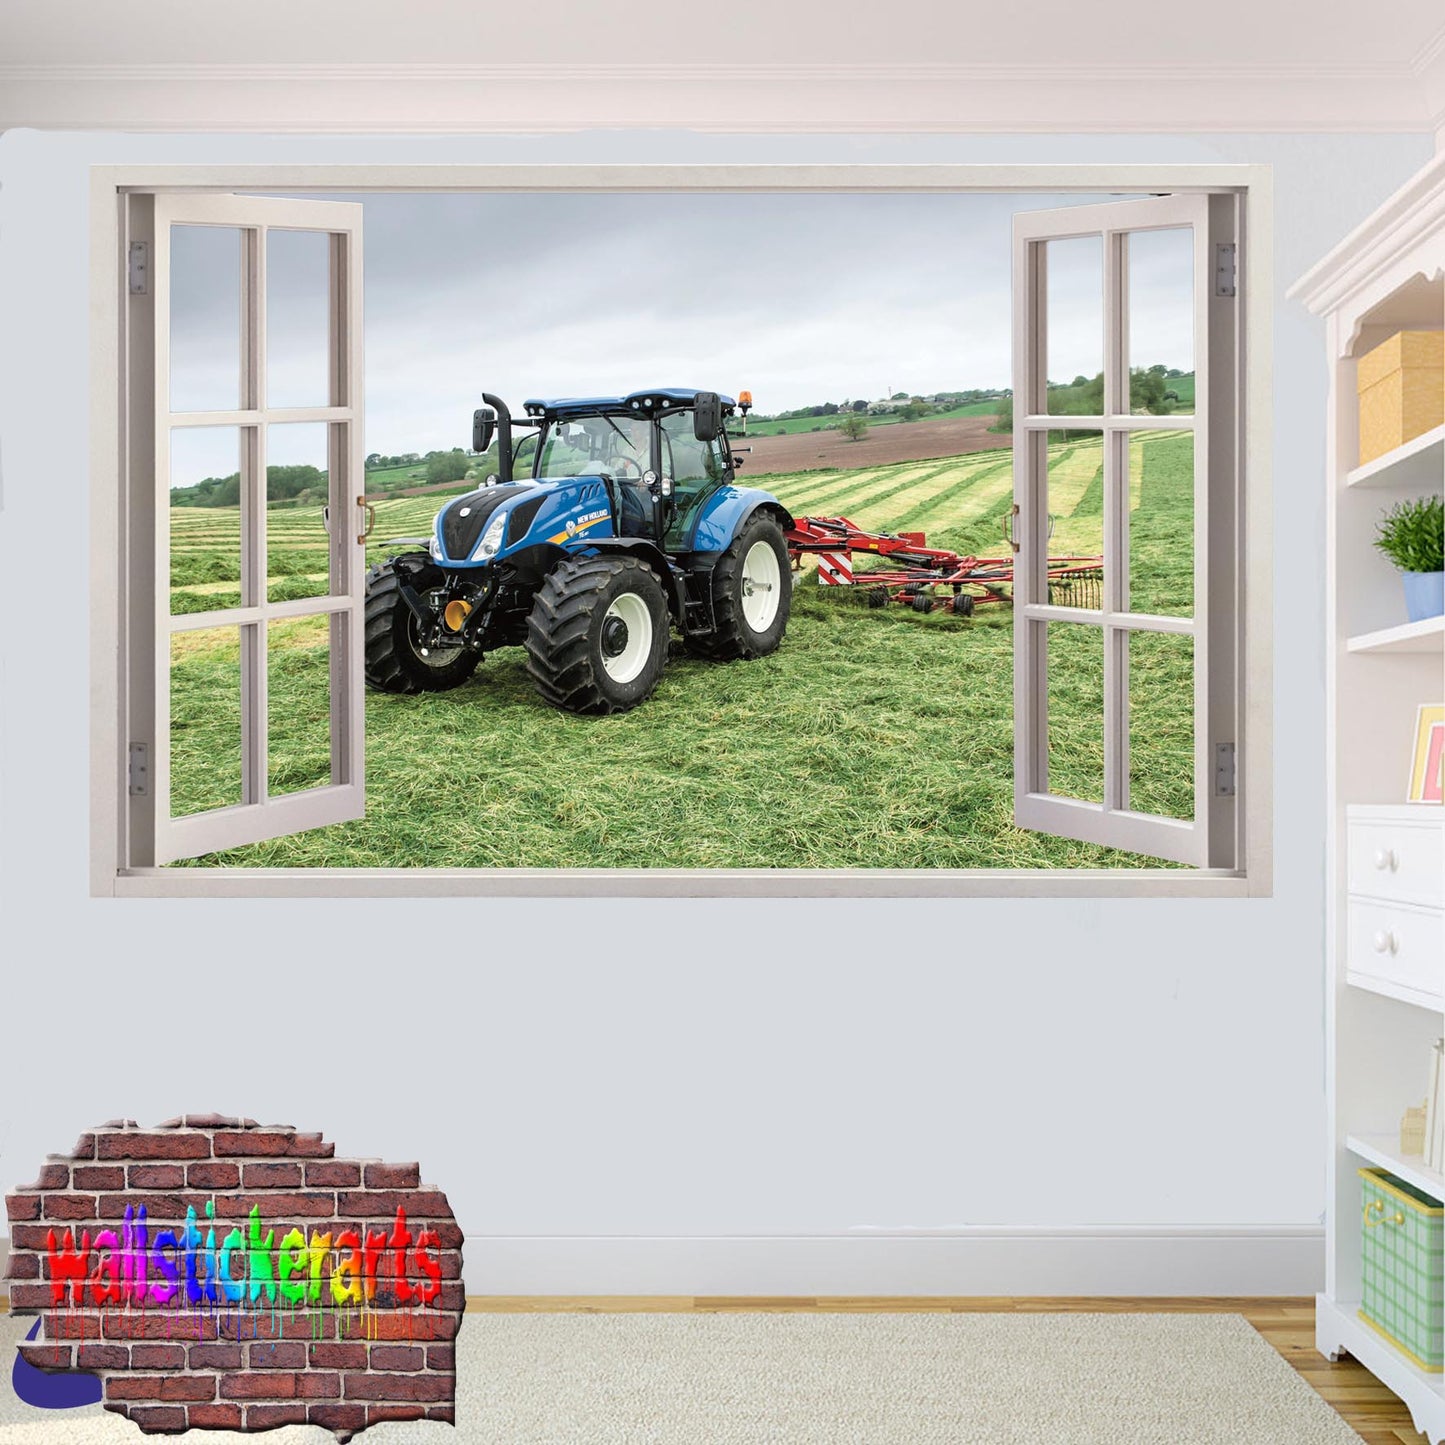 NEW HOLLAND TRACTOR PLOW AGRICULTURAL FARMING TOOLS WALL STICKER POSTER